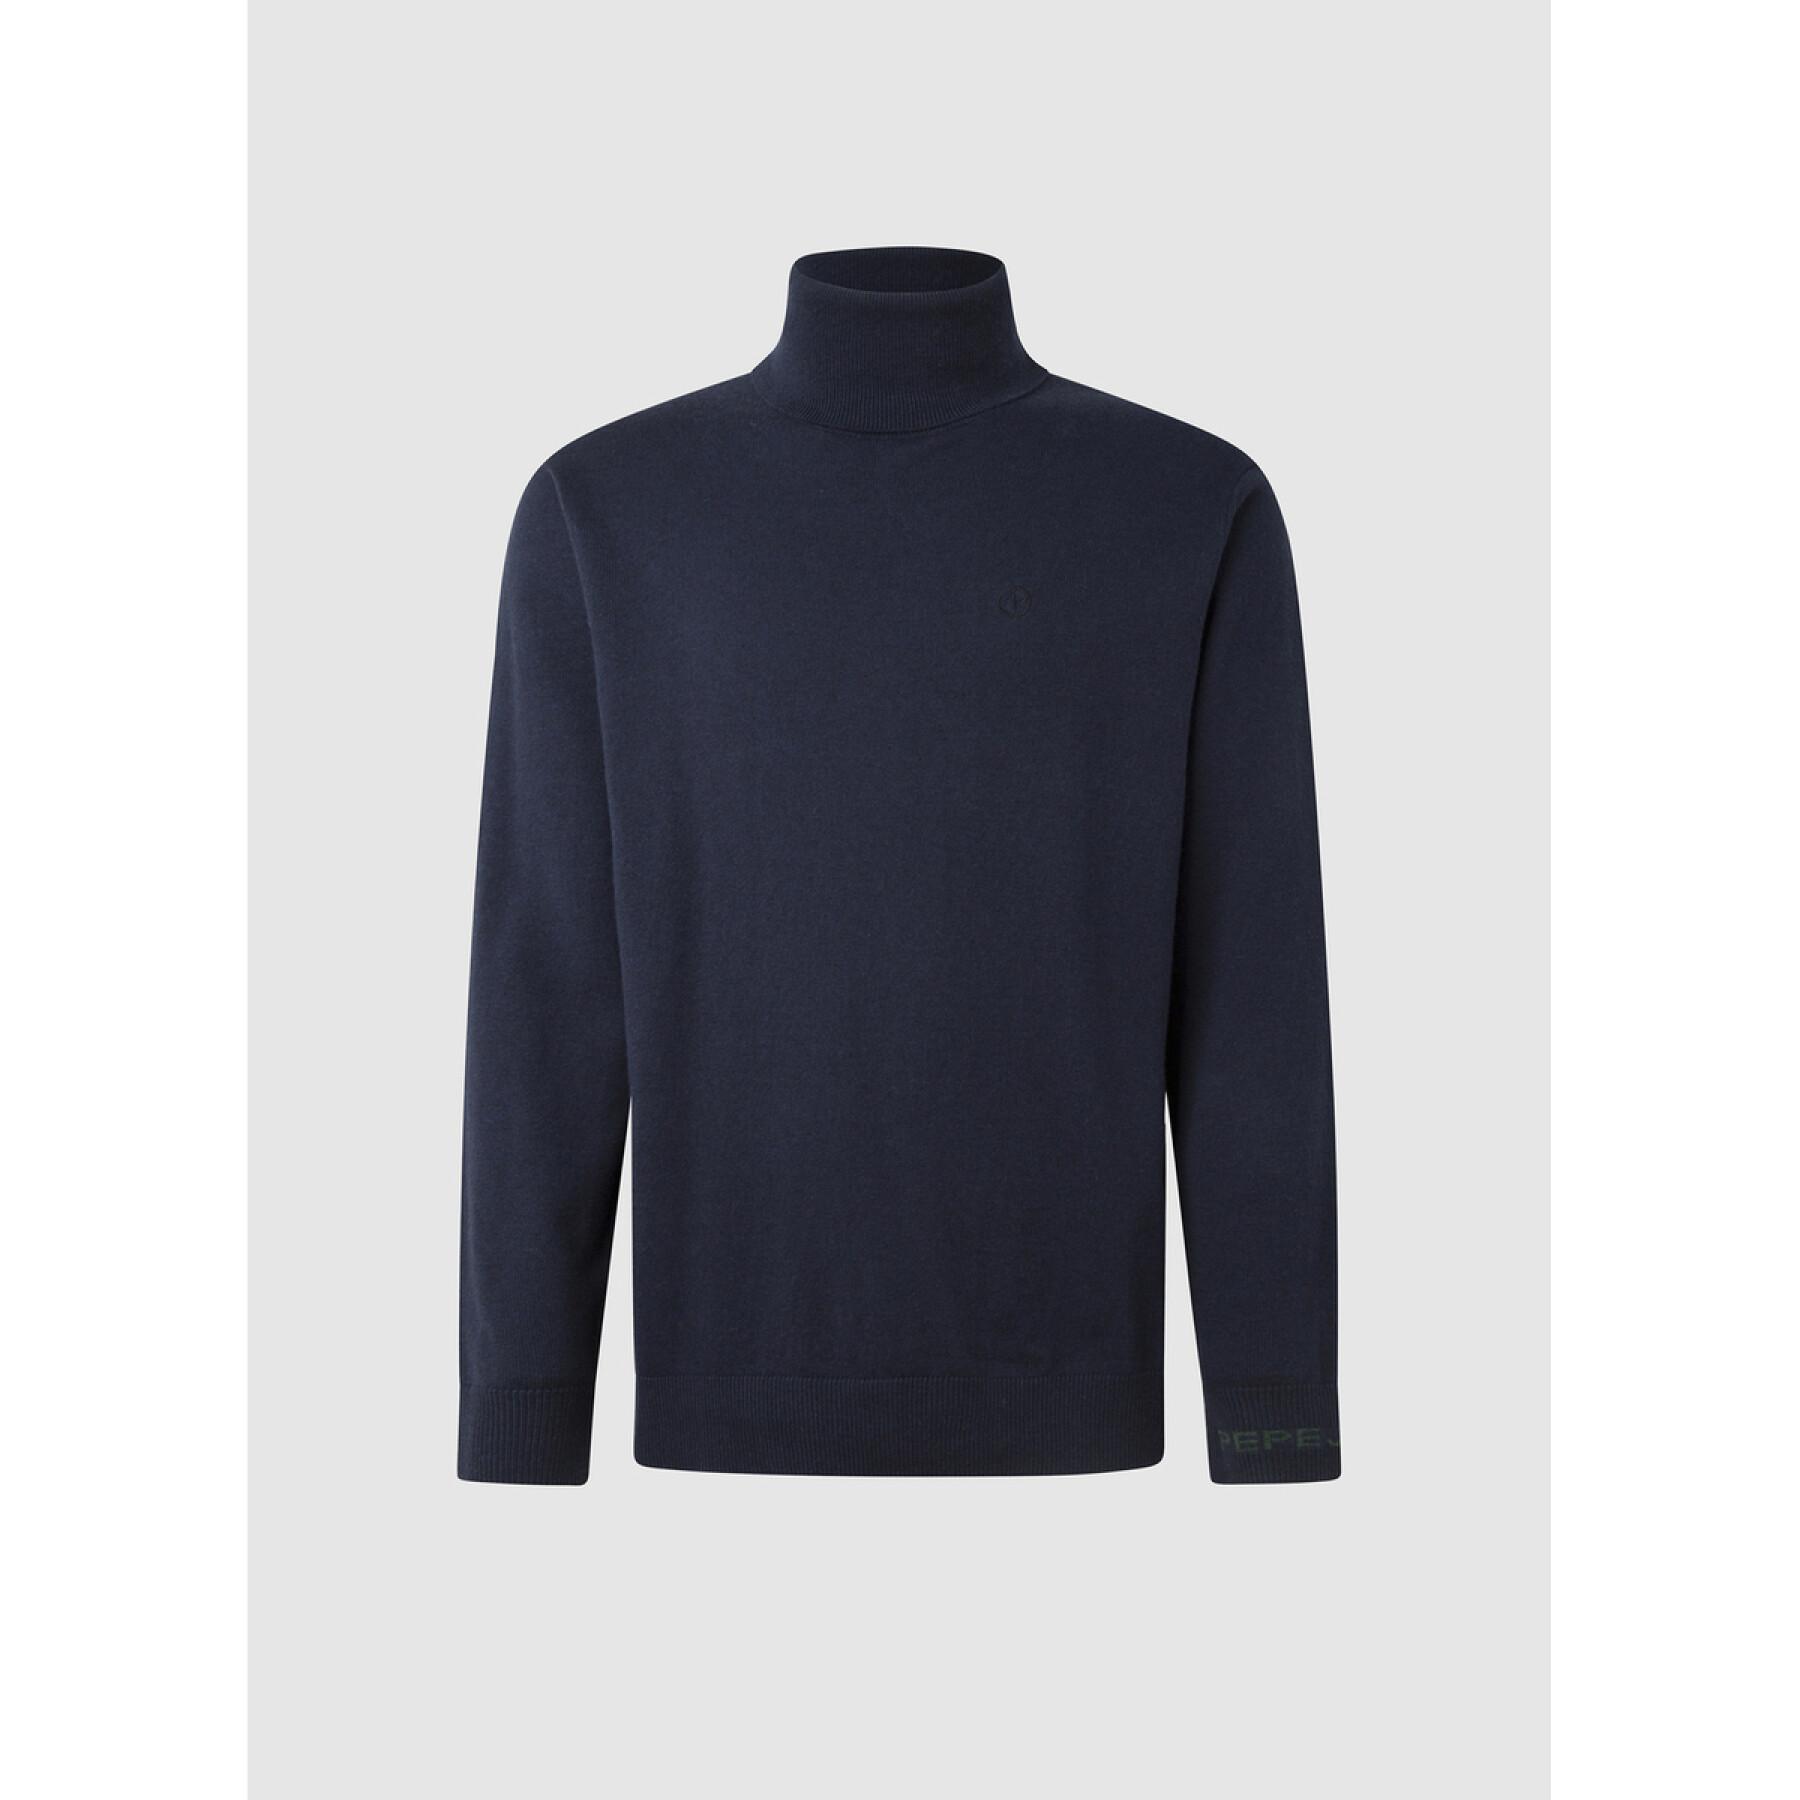 Turtleneck sweater Pepe Jeans Andre